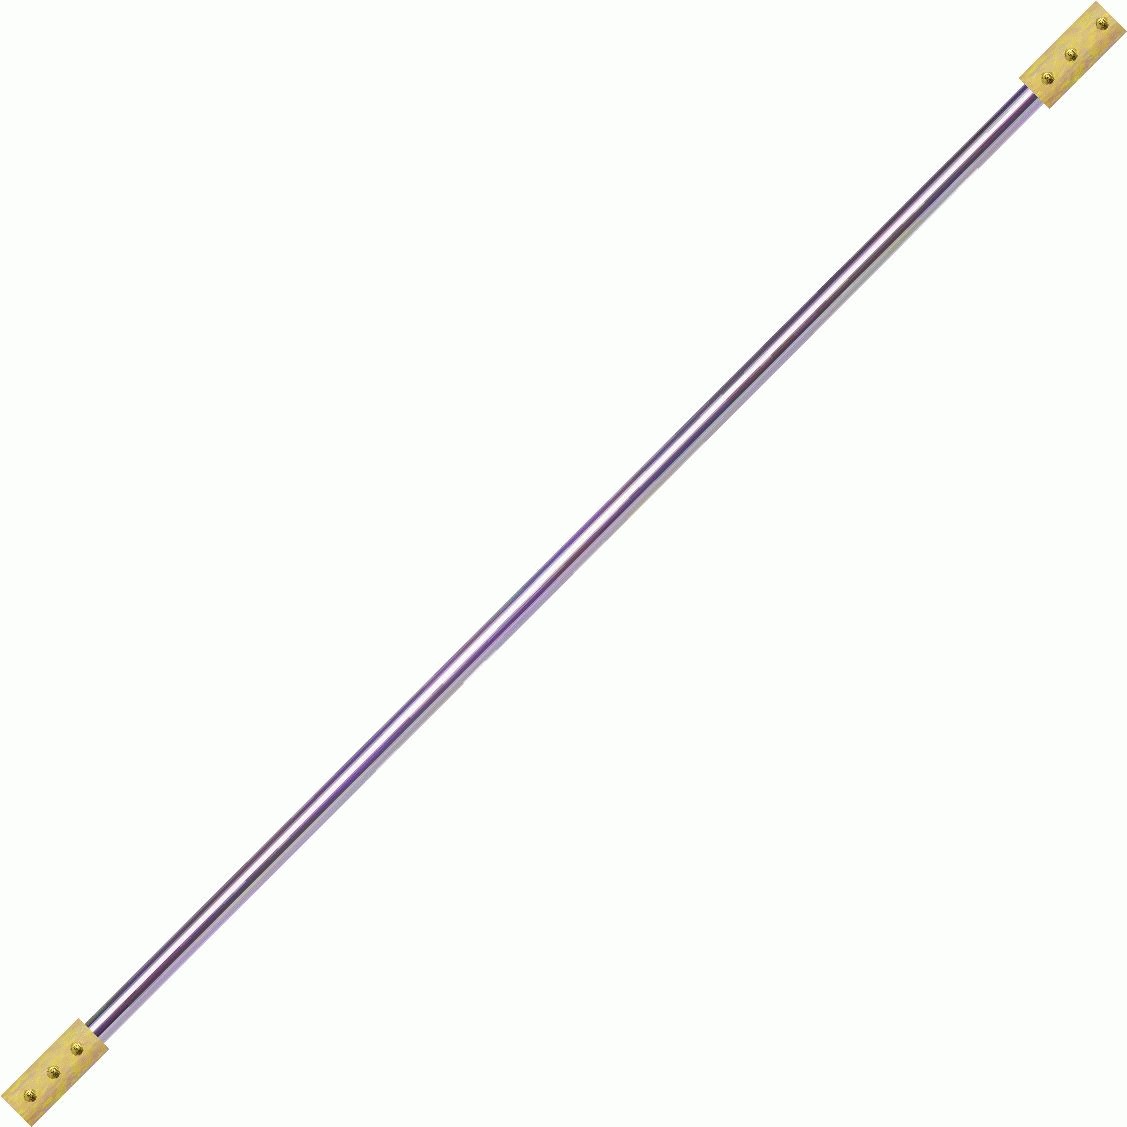 Contact Fire Staff Chrome 140cm With 100mm Kevlar Wicks